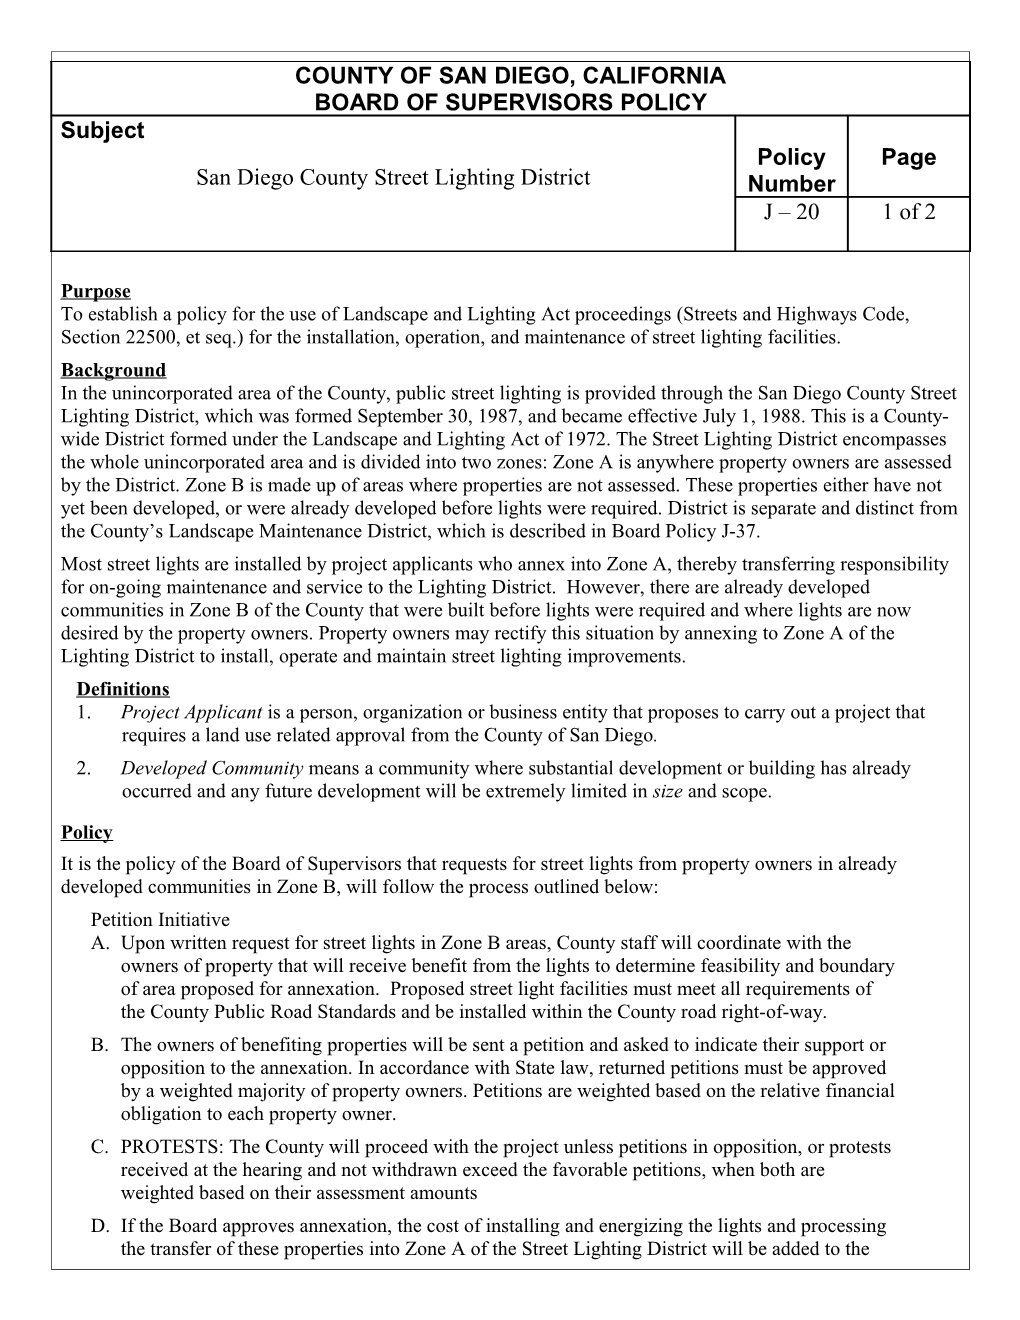 To Establish a Policy for the Use of Landscape and Lighting Act Proceedings (Streets And